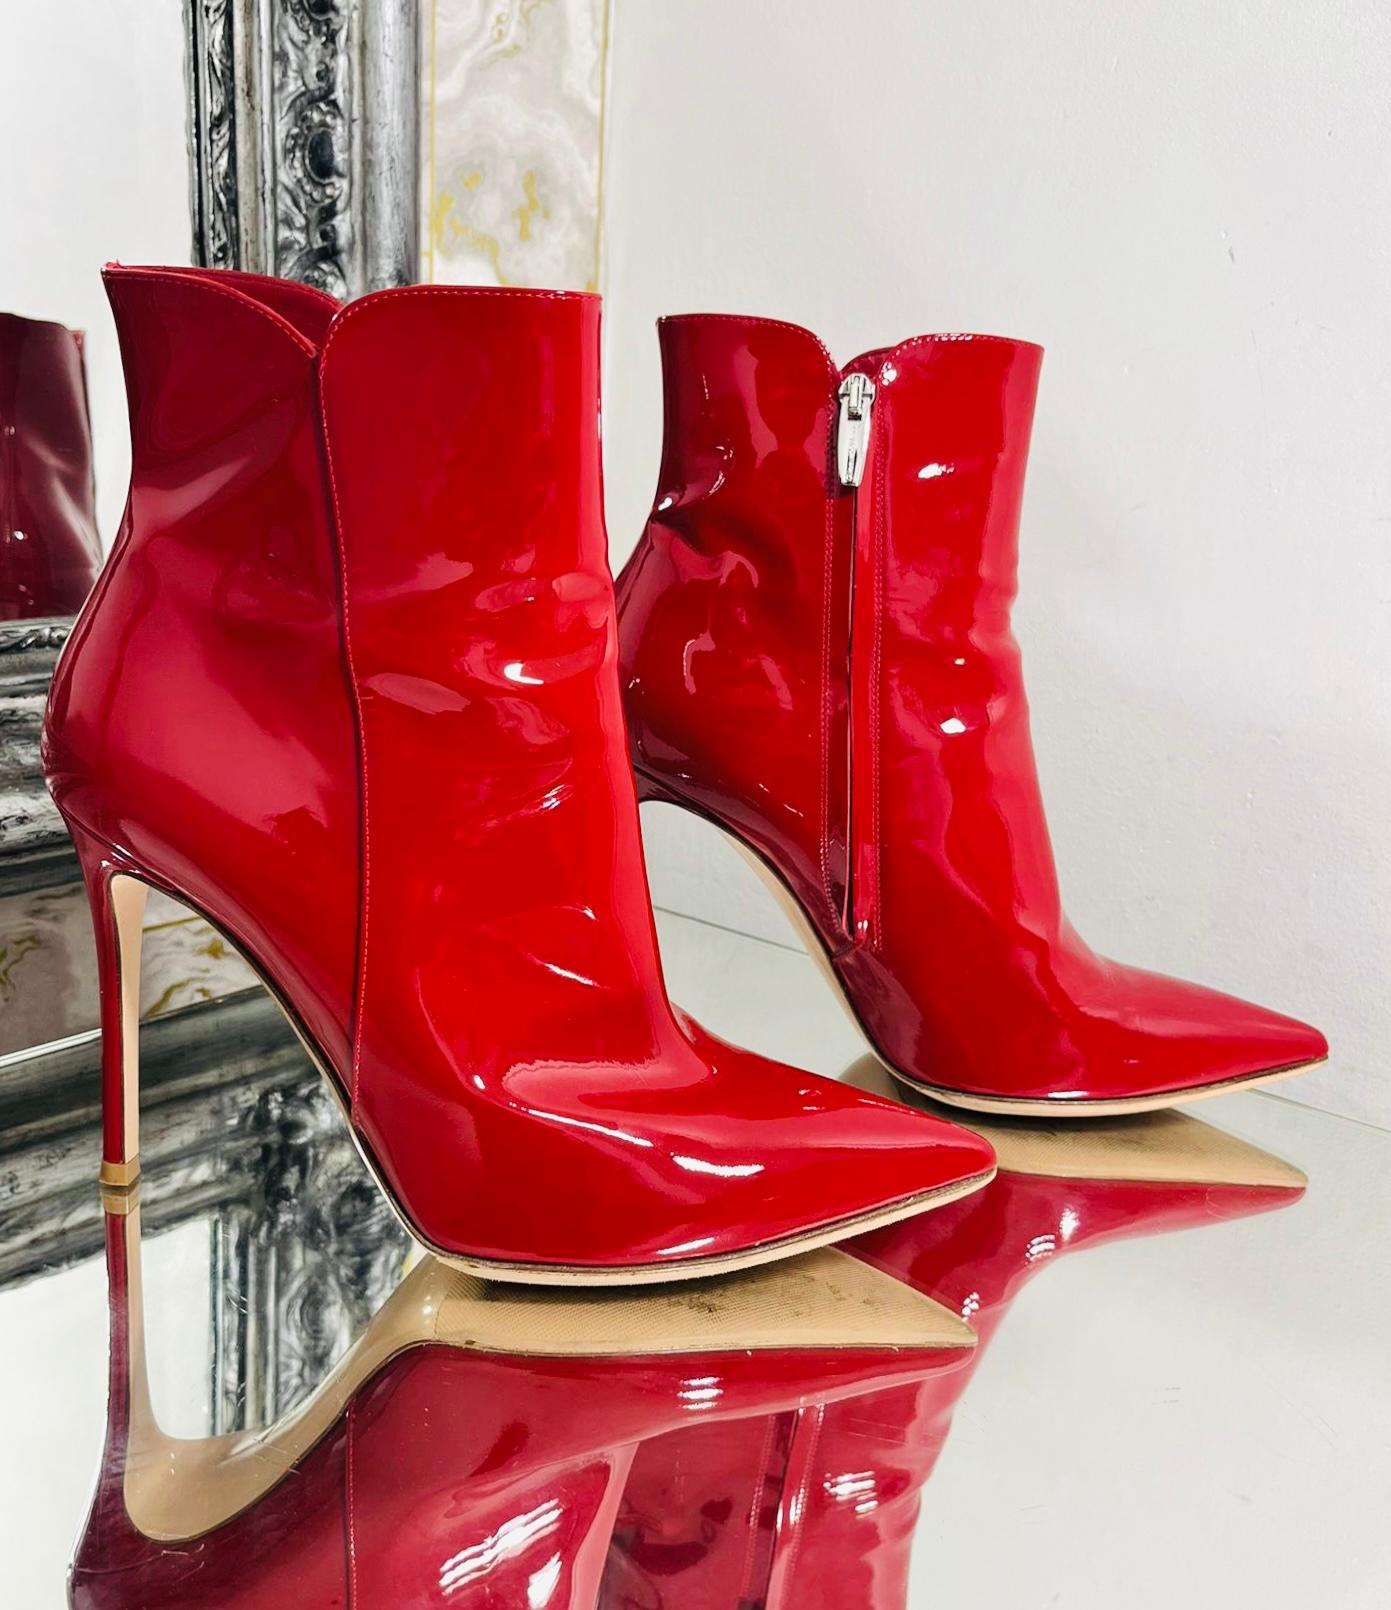 Gianvito Rossi Patent Leather Ankle Boots In Excellent Condition For Sale In London, GB